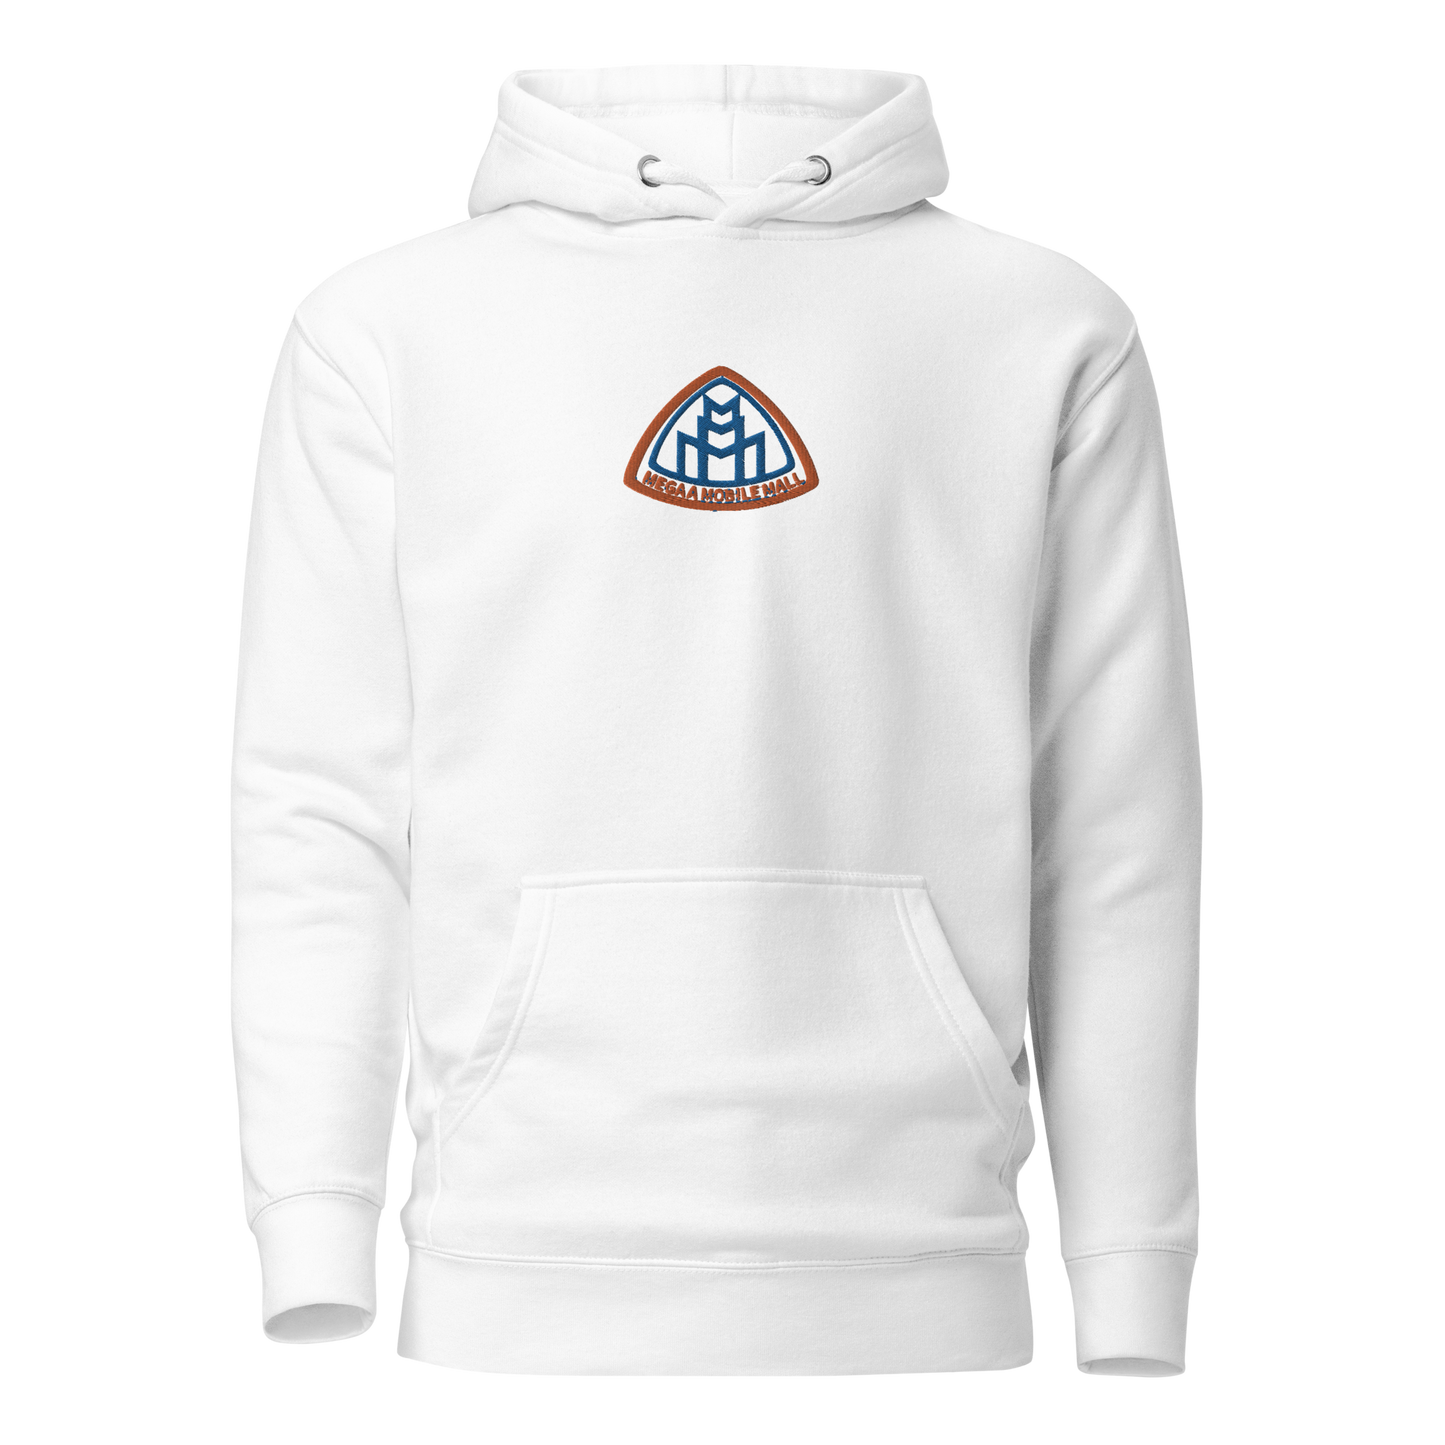 new york colorway megaamobilemall logo stitched white hoodie